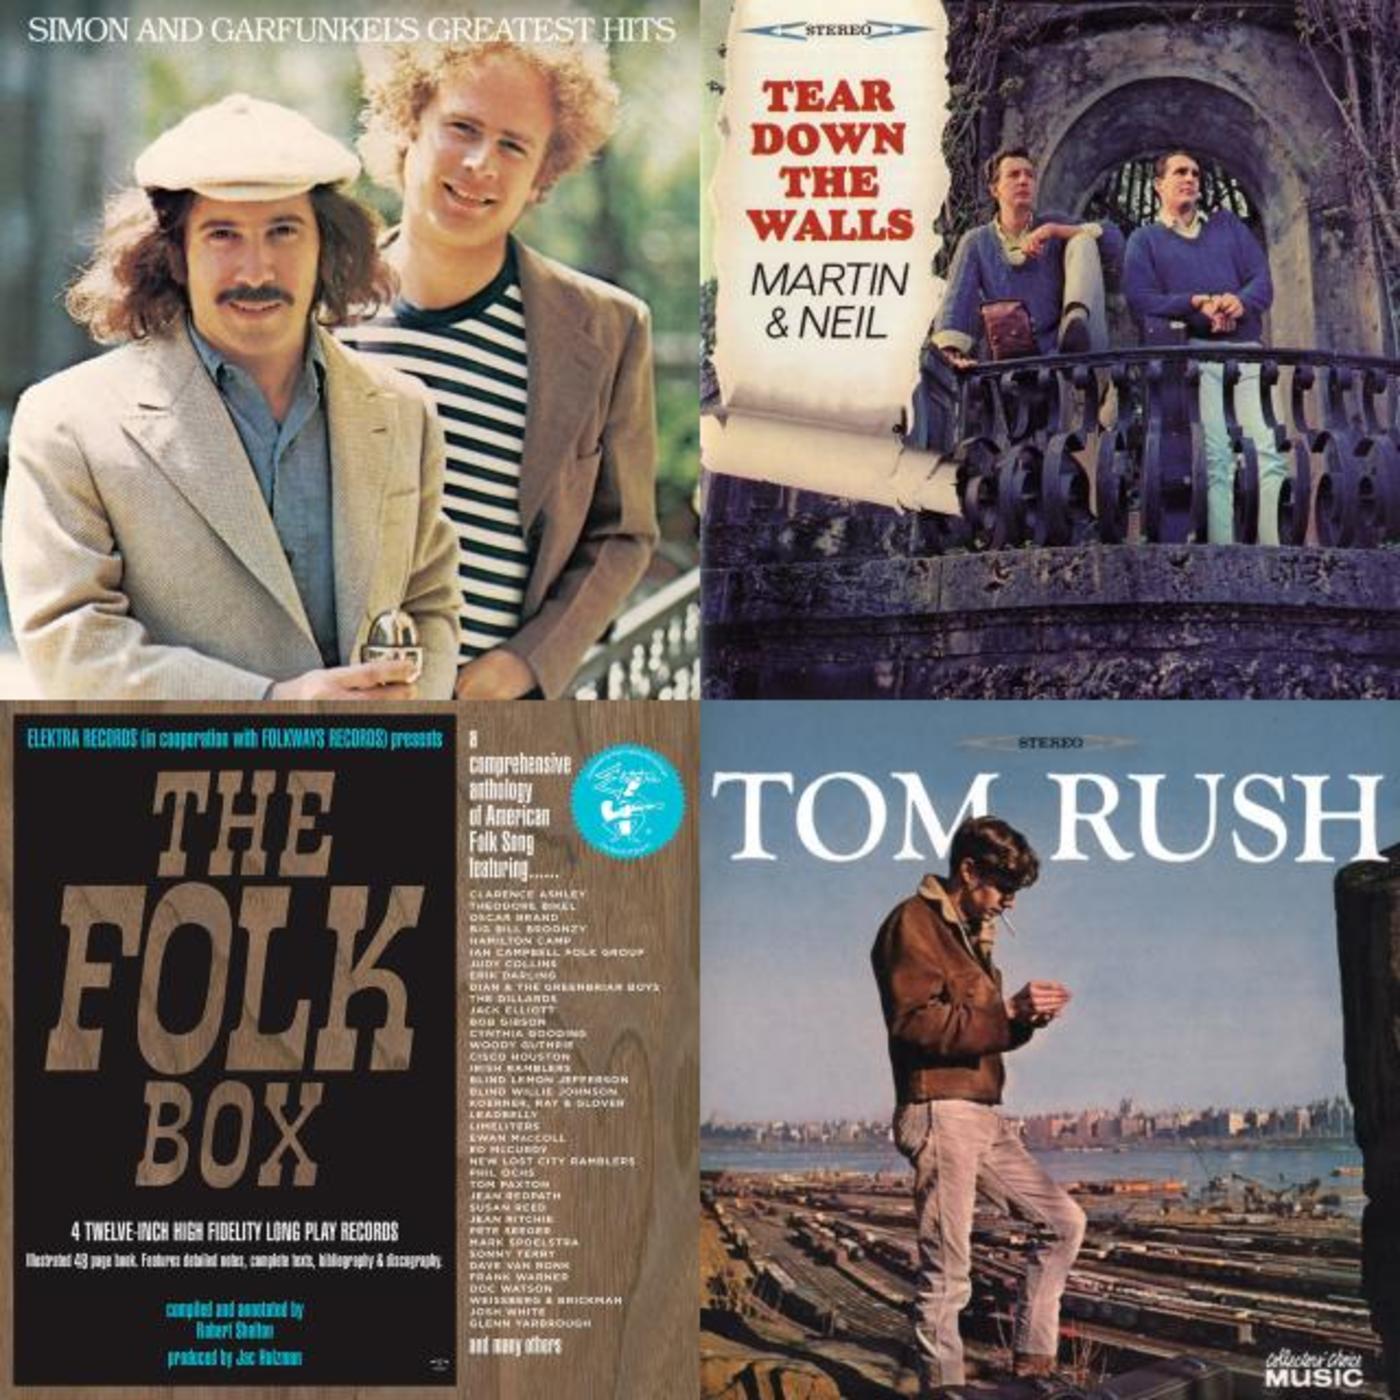 Echoes of The Folk Box: 50 Years, 50 Recordings, 50 Acts - Jac Holzman, Ted Olson, Vince Martin & Fred Neil, Tom Rush, Simon & Garfunkel, Grateful Dead, The Byrds, Fotheringay